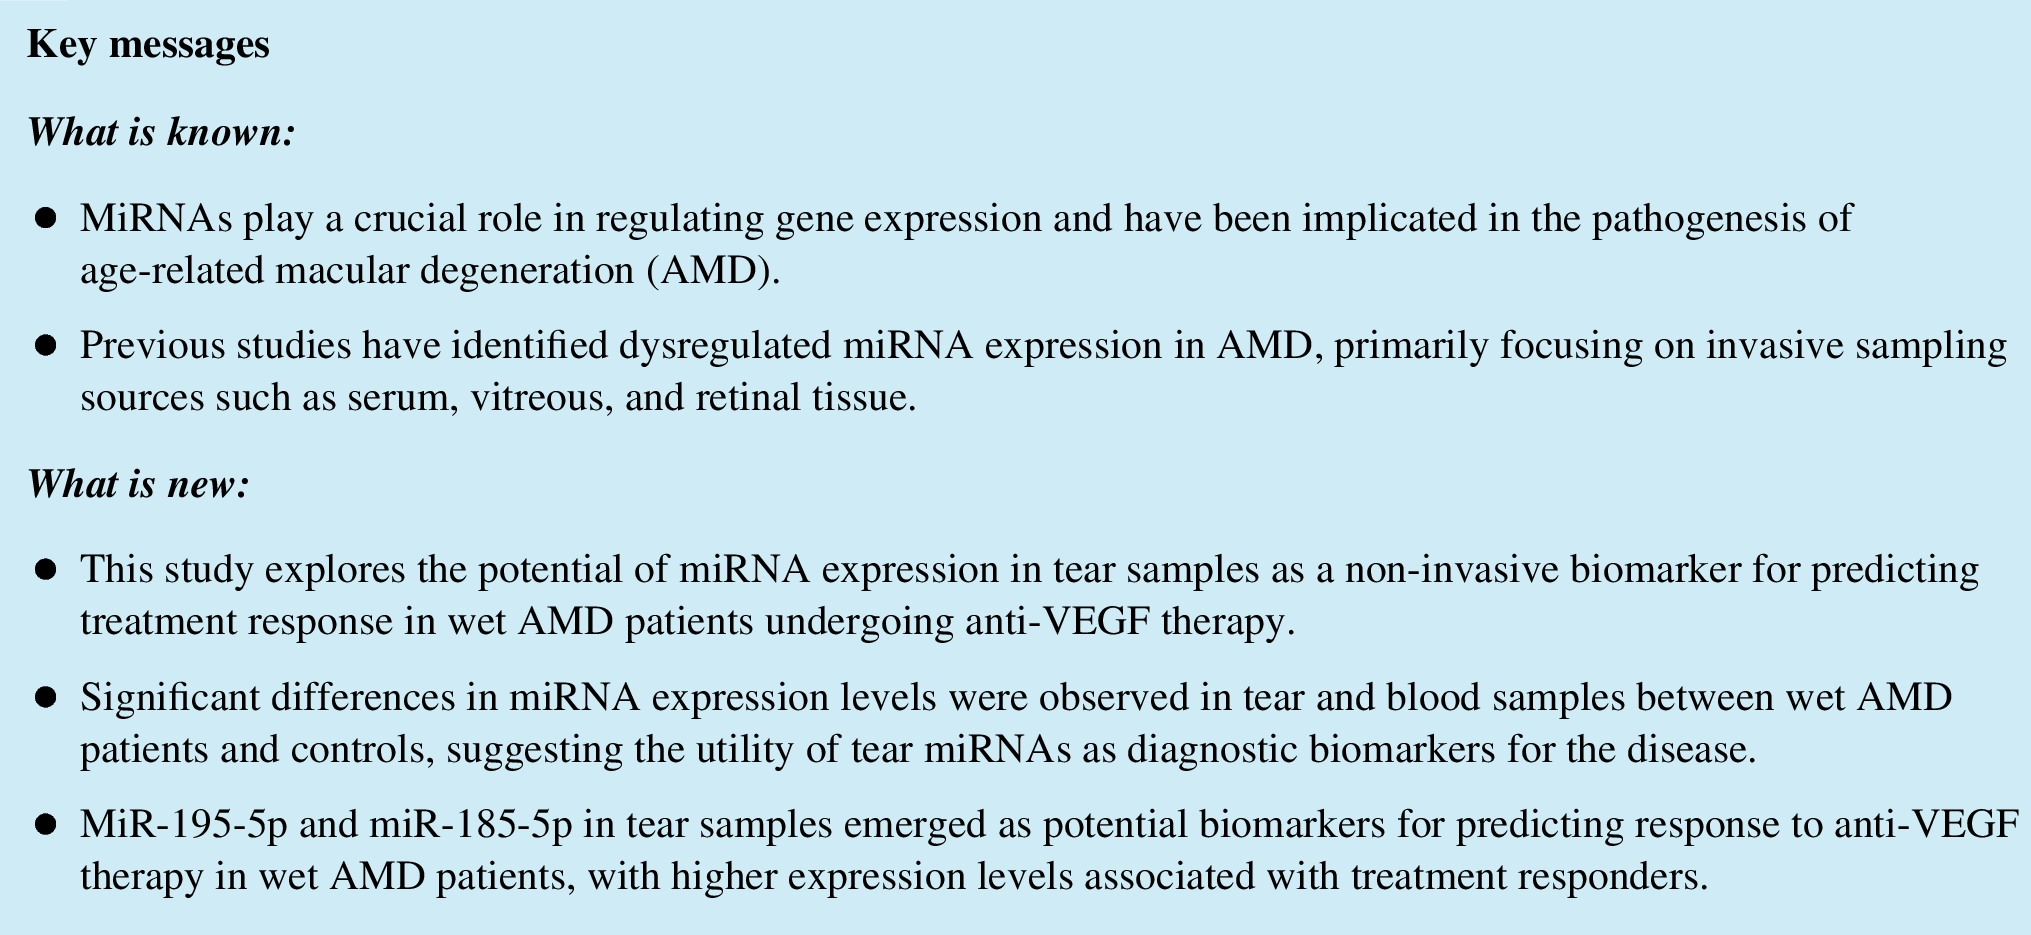 MicroRNA expression profiling in tears and blood as predictive biomarkers for anti-VEGF treatment response in wet age-related macular degeneration